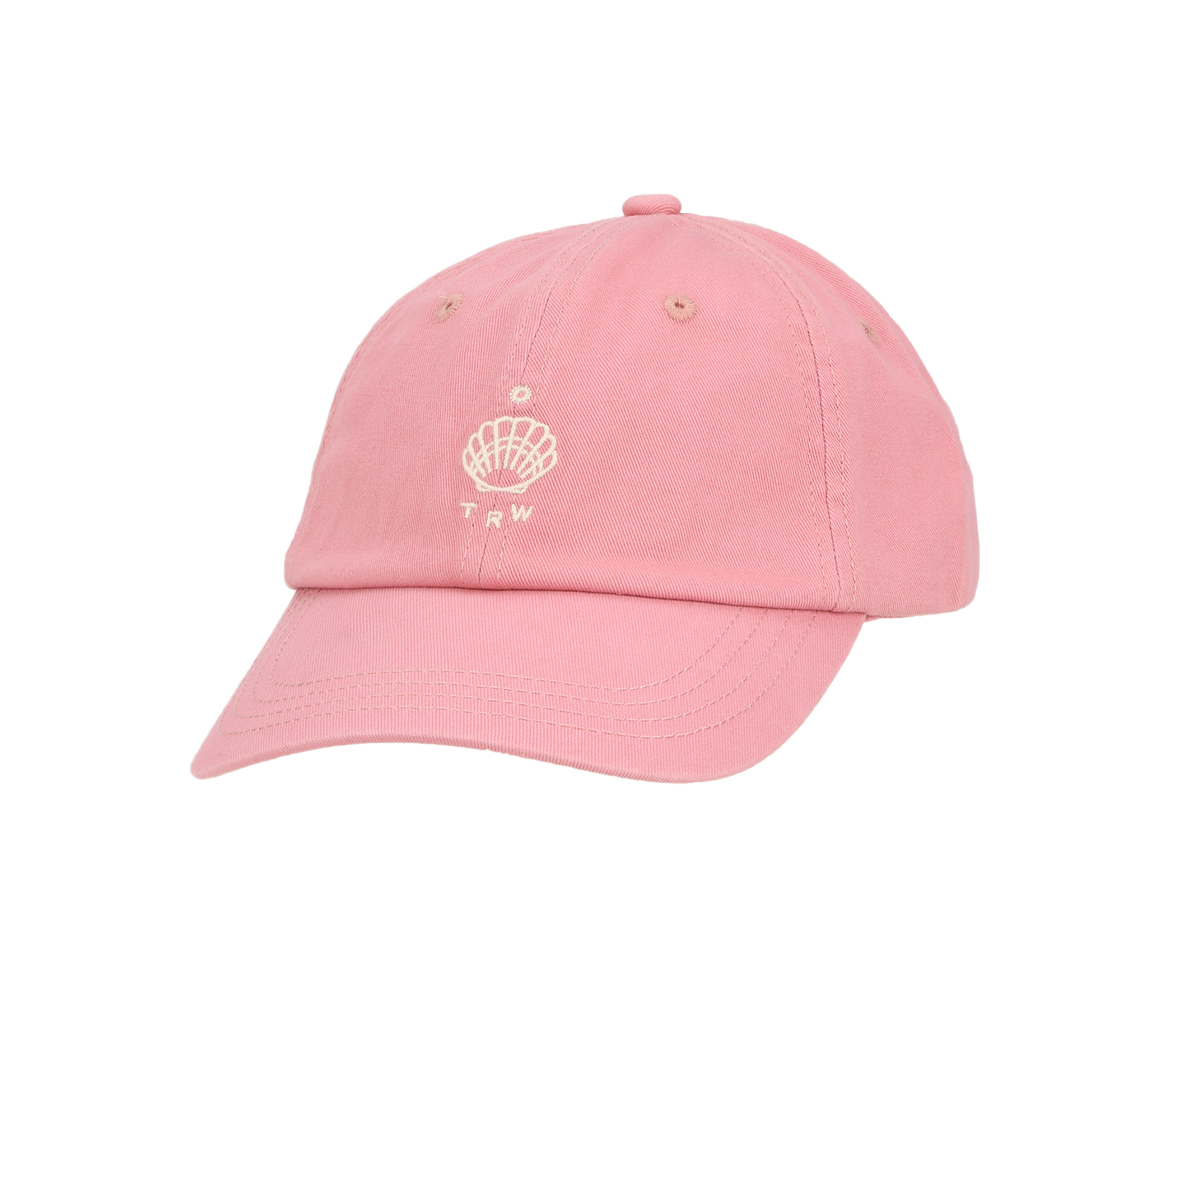 Gorra Trown Sea Shell Unisex,  image number null